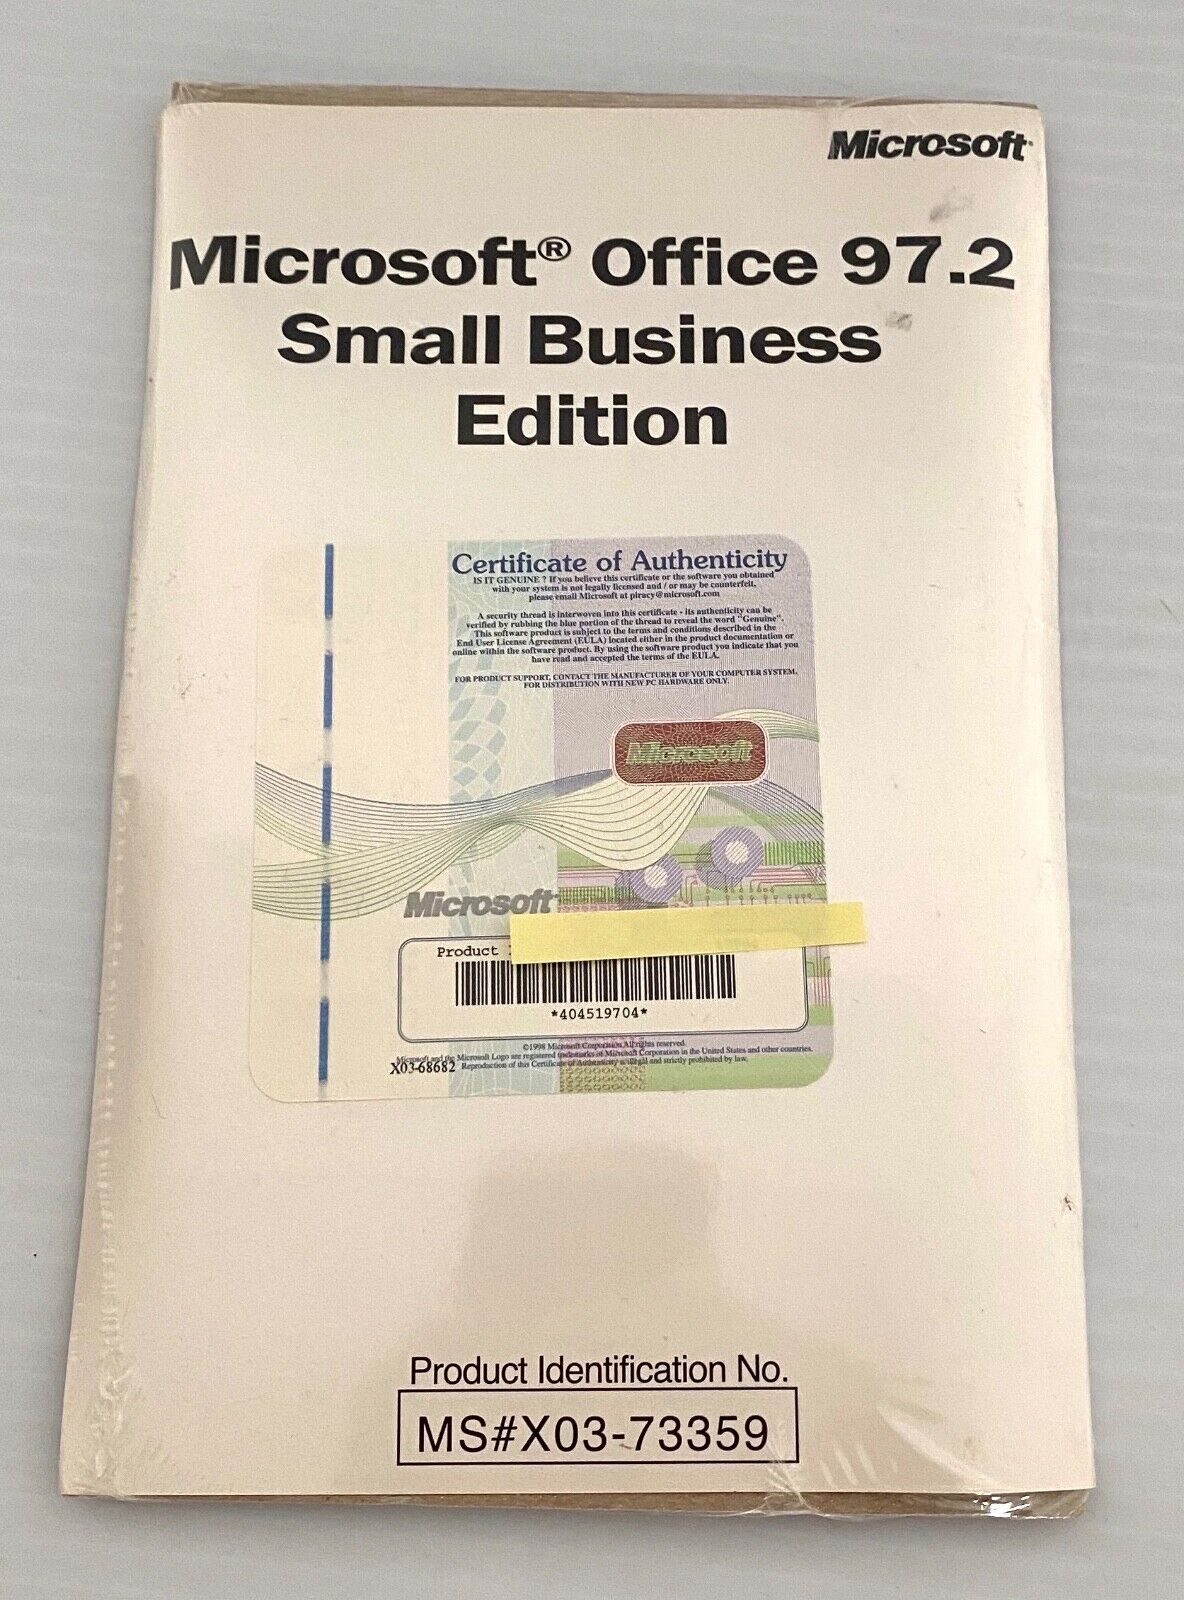 Microsoft Office 97.2 Small Business Edition w COA & Product ID  MS#X03-73359